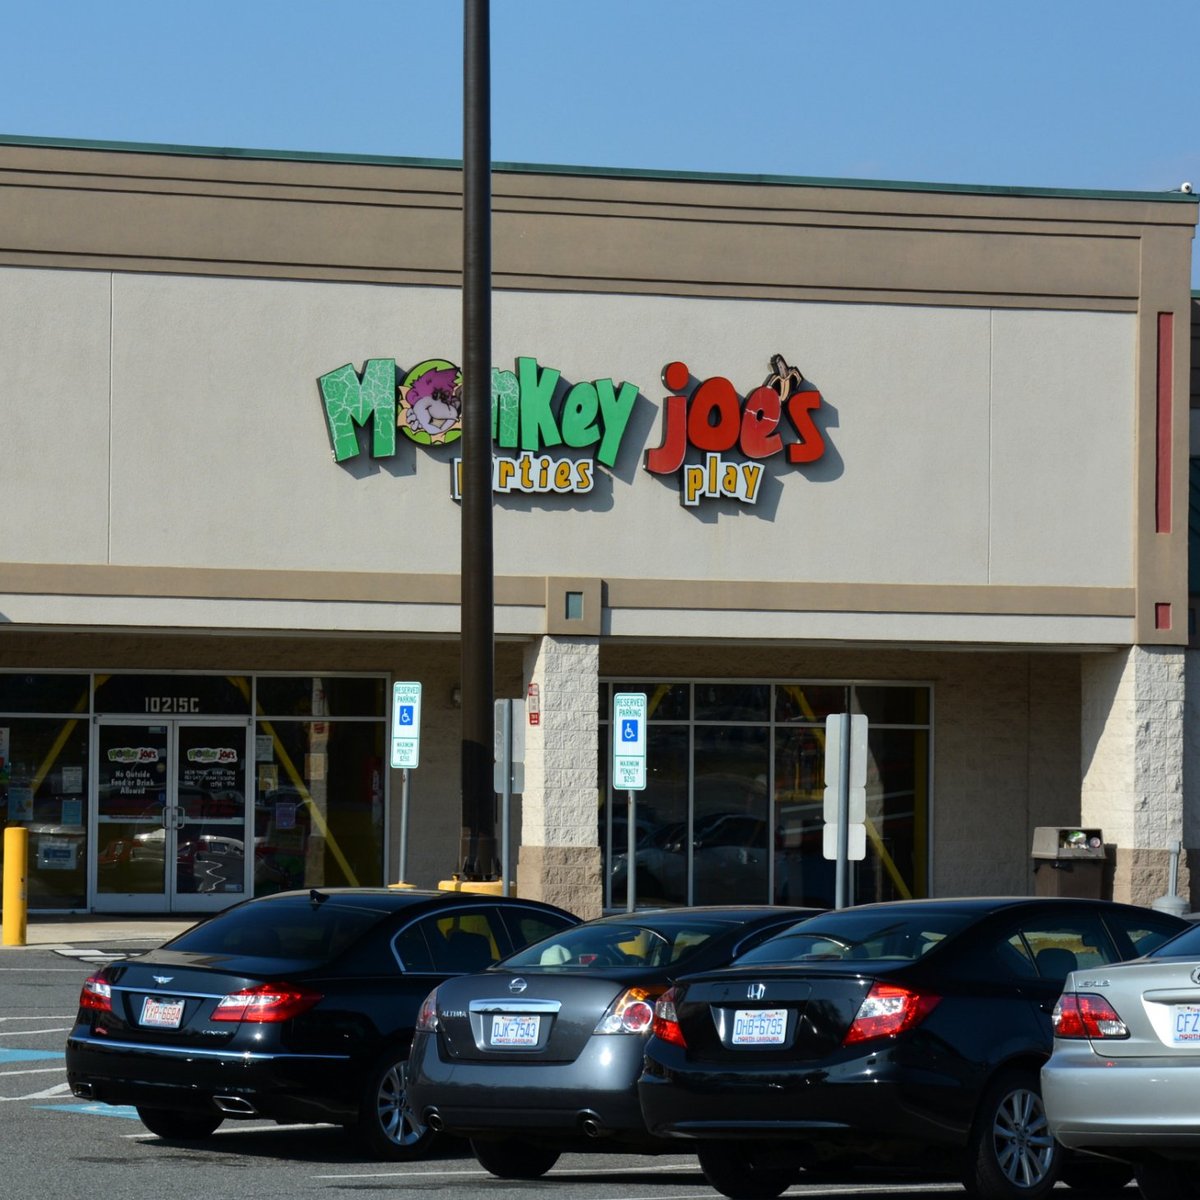 Monkey Joes - All You Need to Know BEFORE You Go (with Photos)